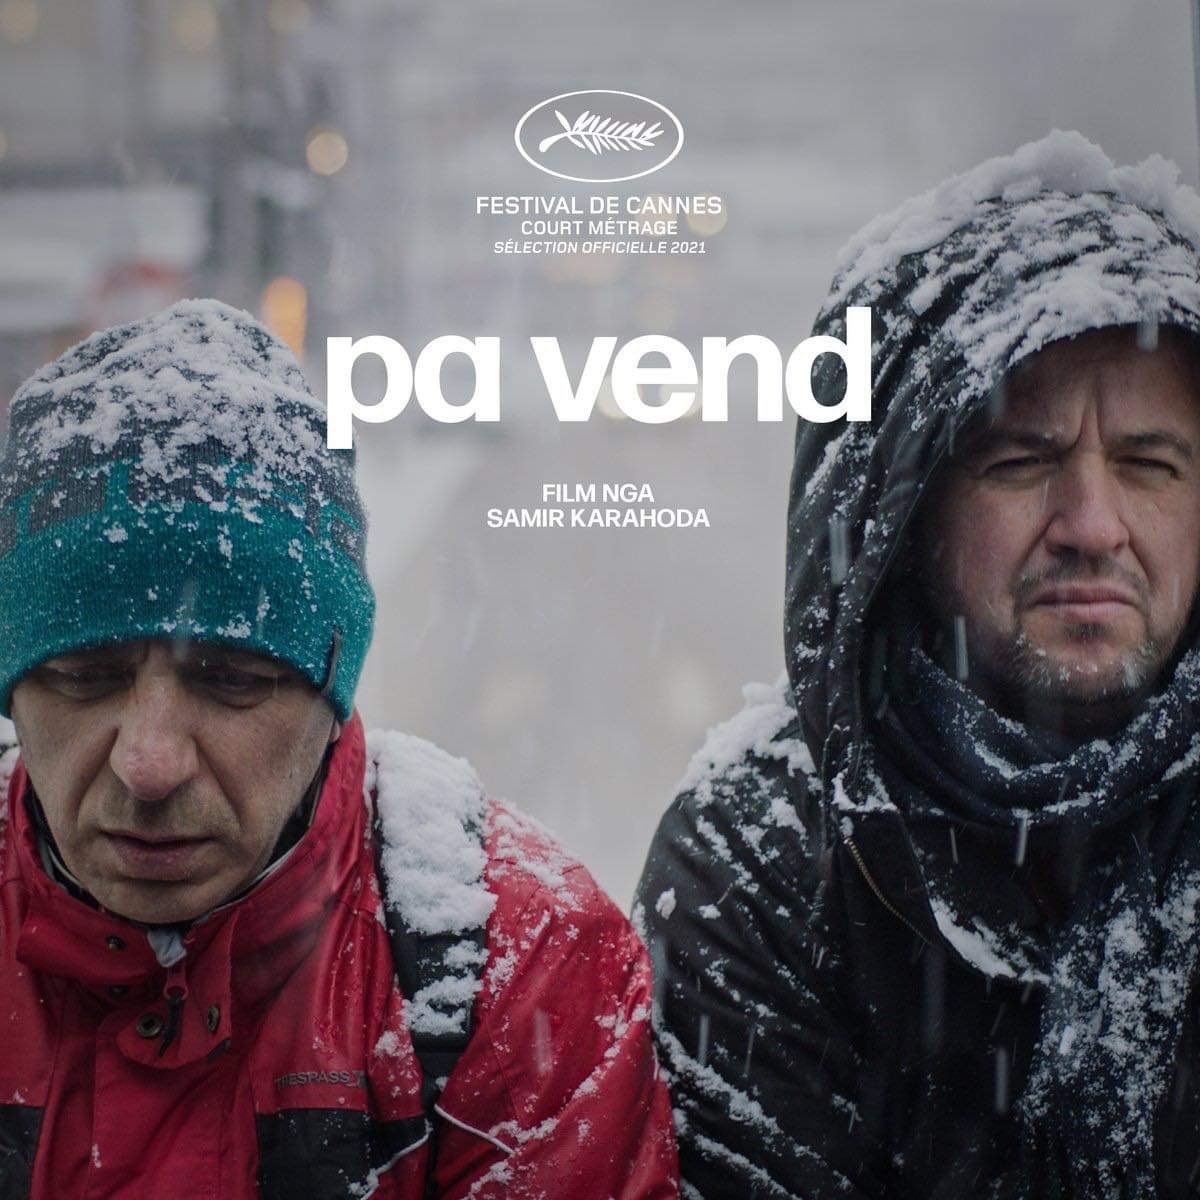 'Pa vend' edited by a montage student is going to Cannes